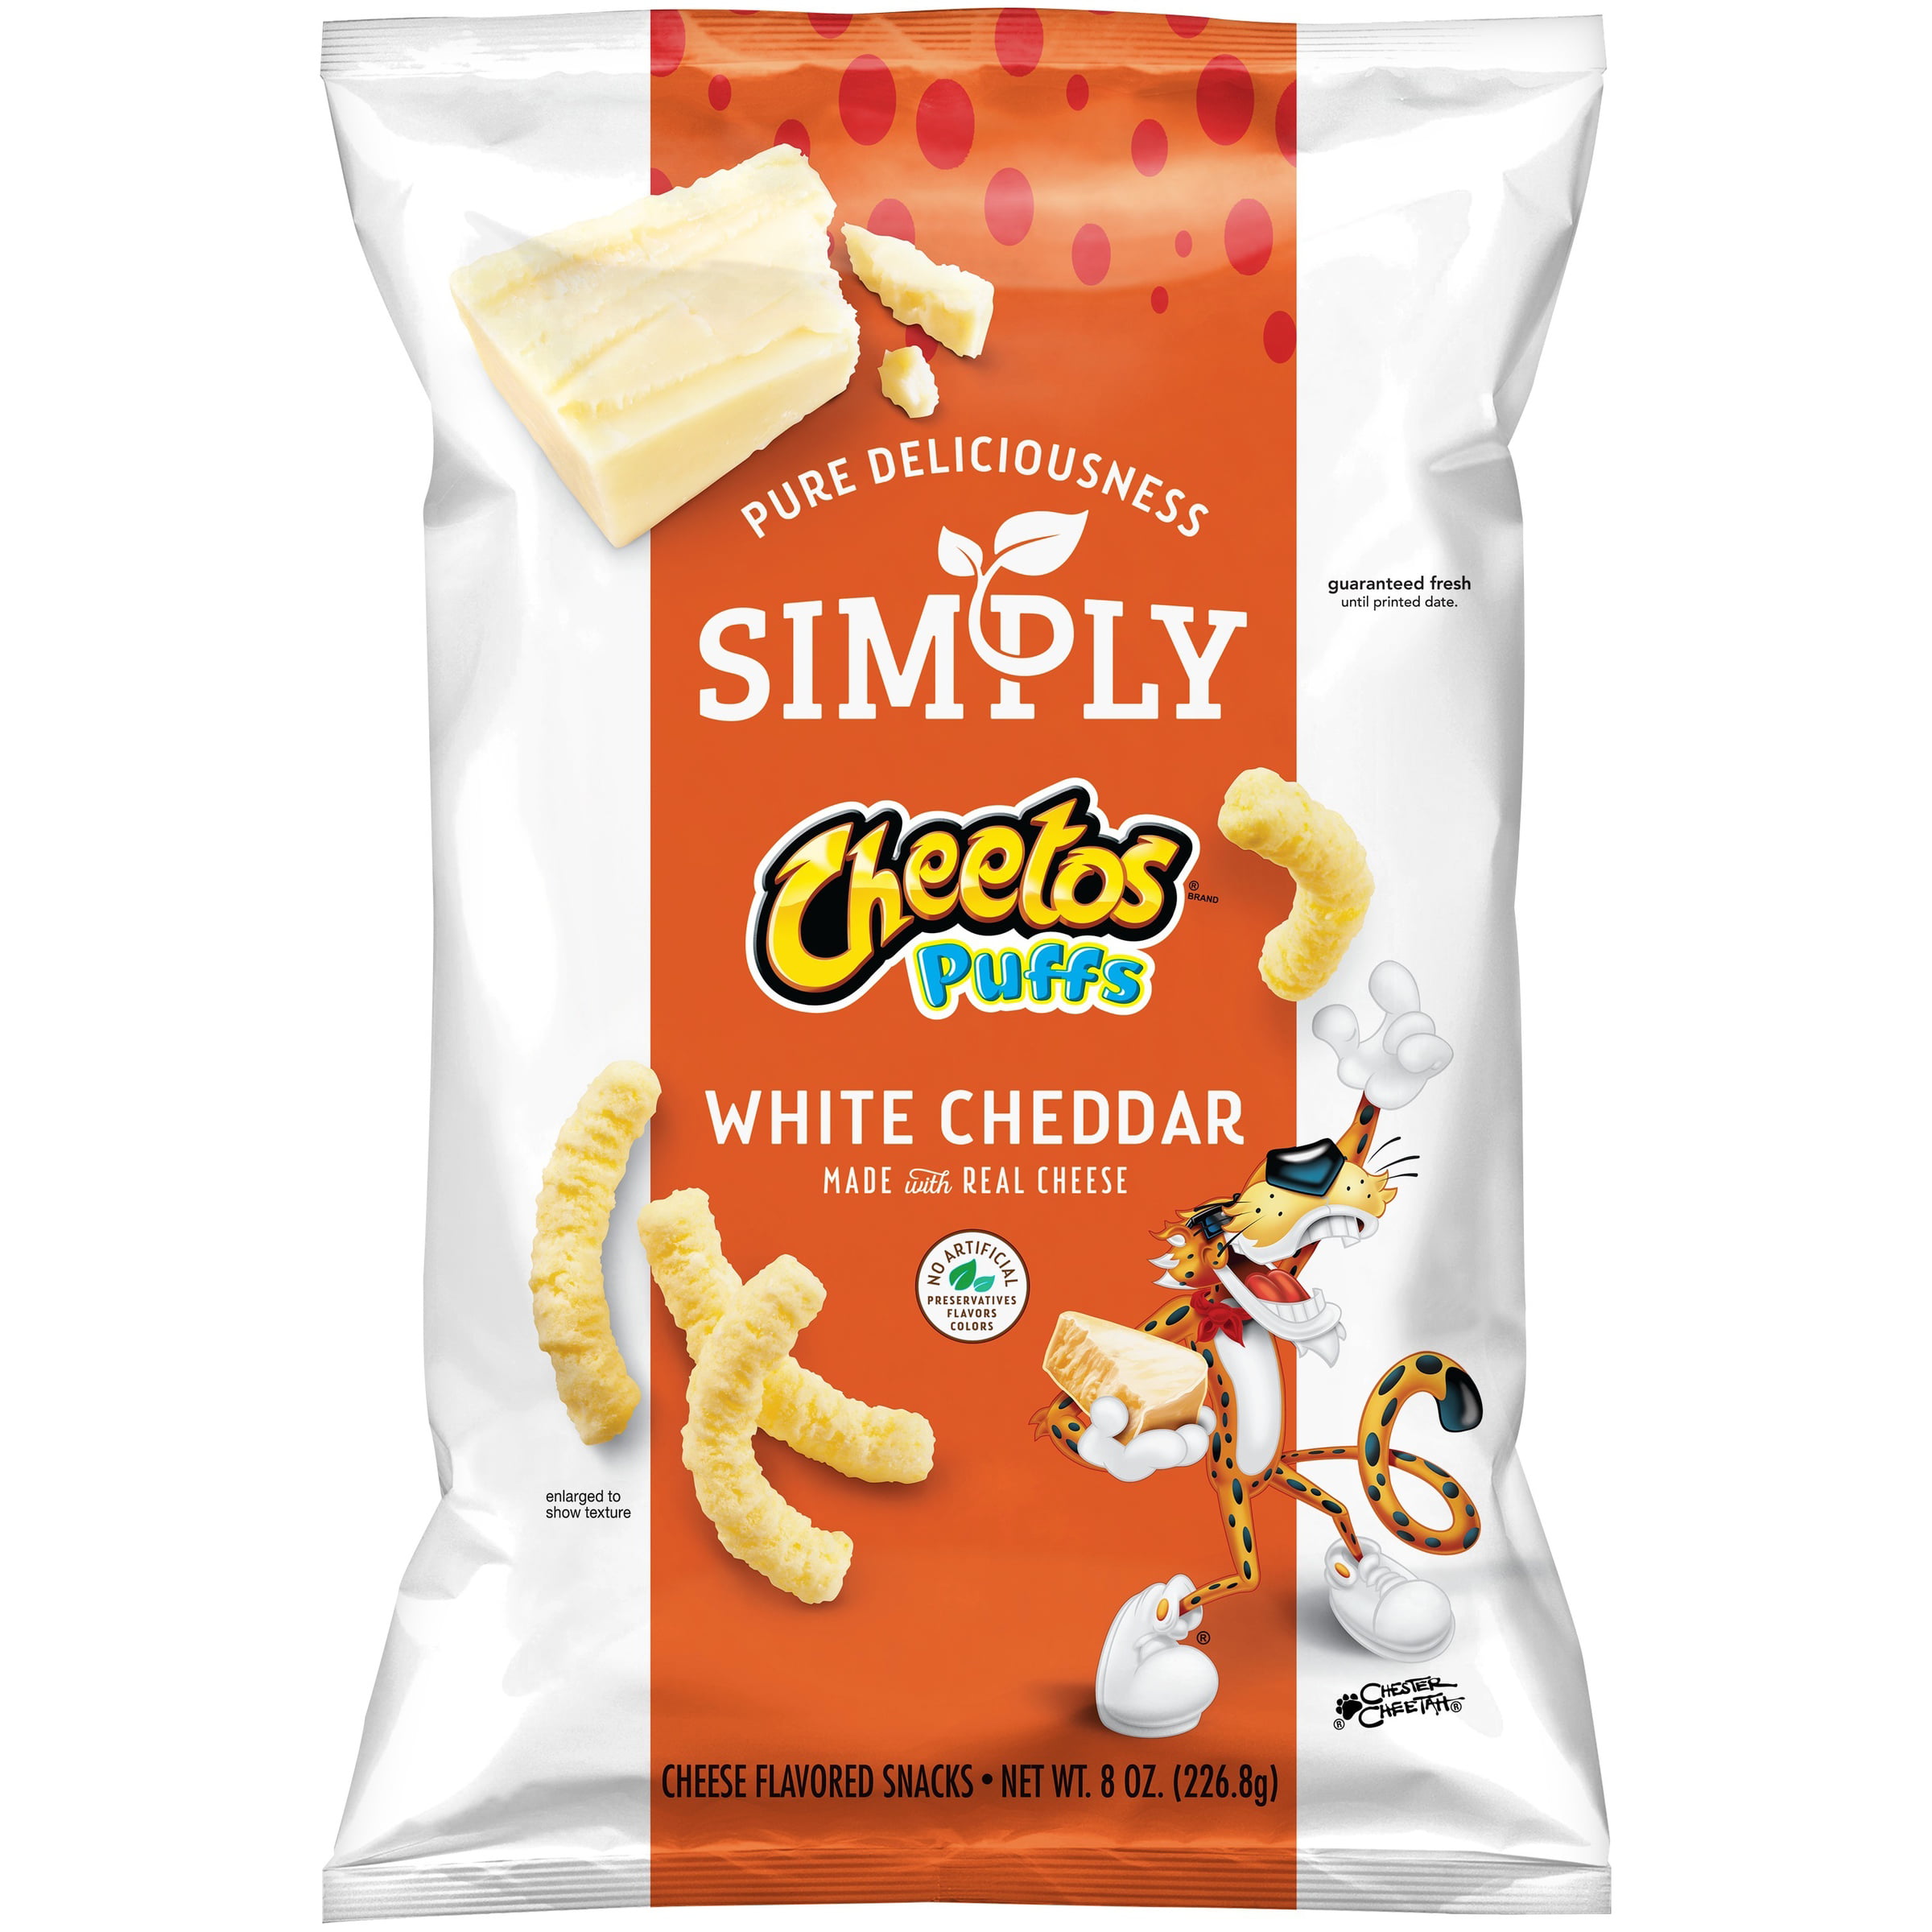 (3 Pack) Simply Cheetos Puffs Cheese Flavored Snacks, White Cheddar, 8